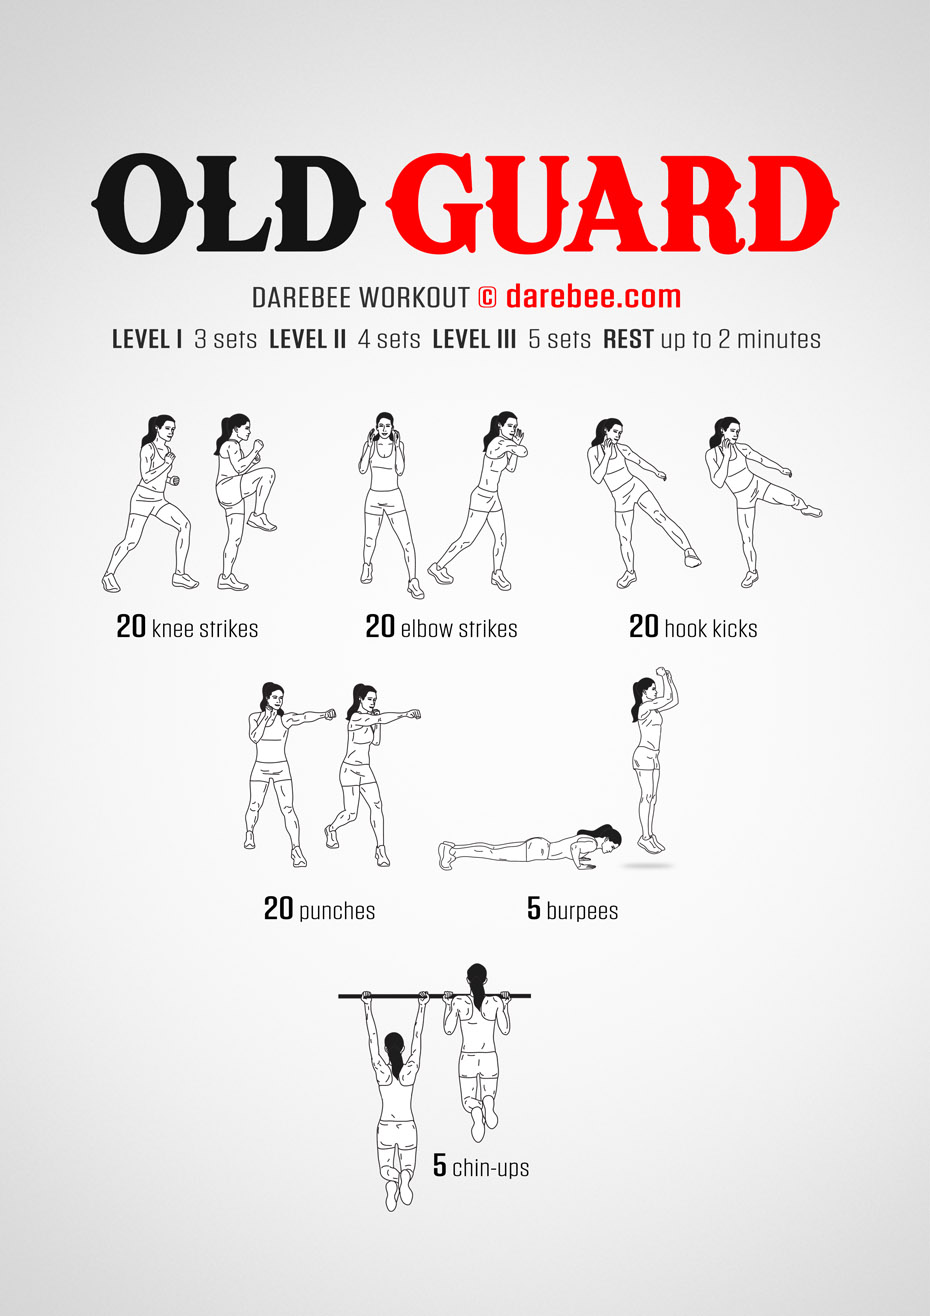 the Old Guard is a DAREBEE home fitness workout that helps you build strength, endurance and mobility.